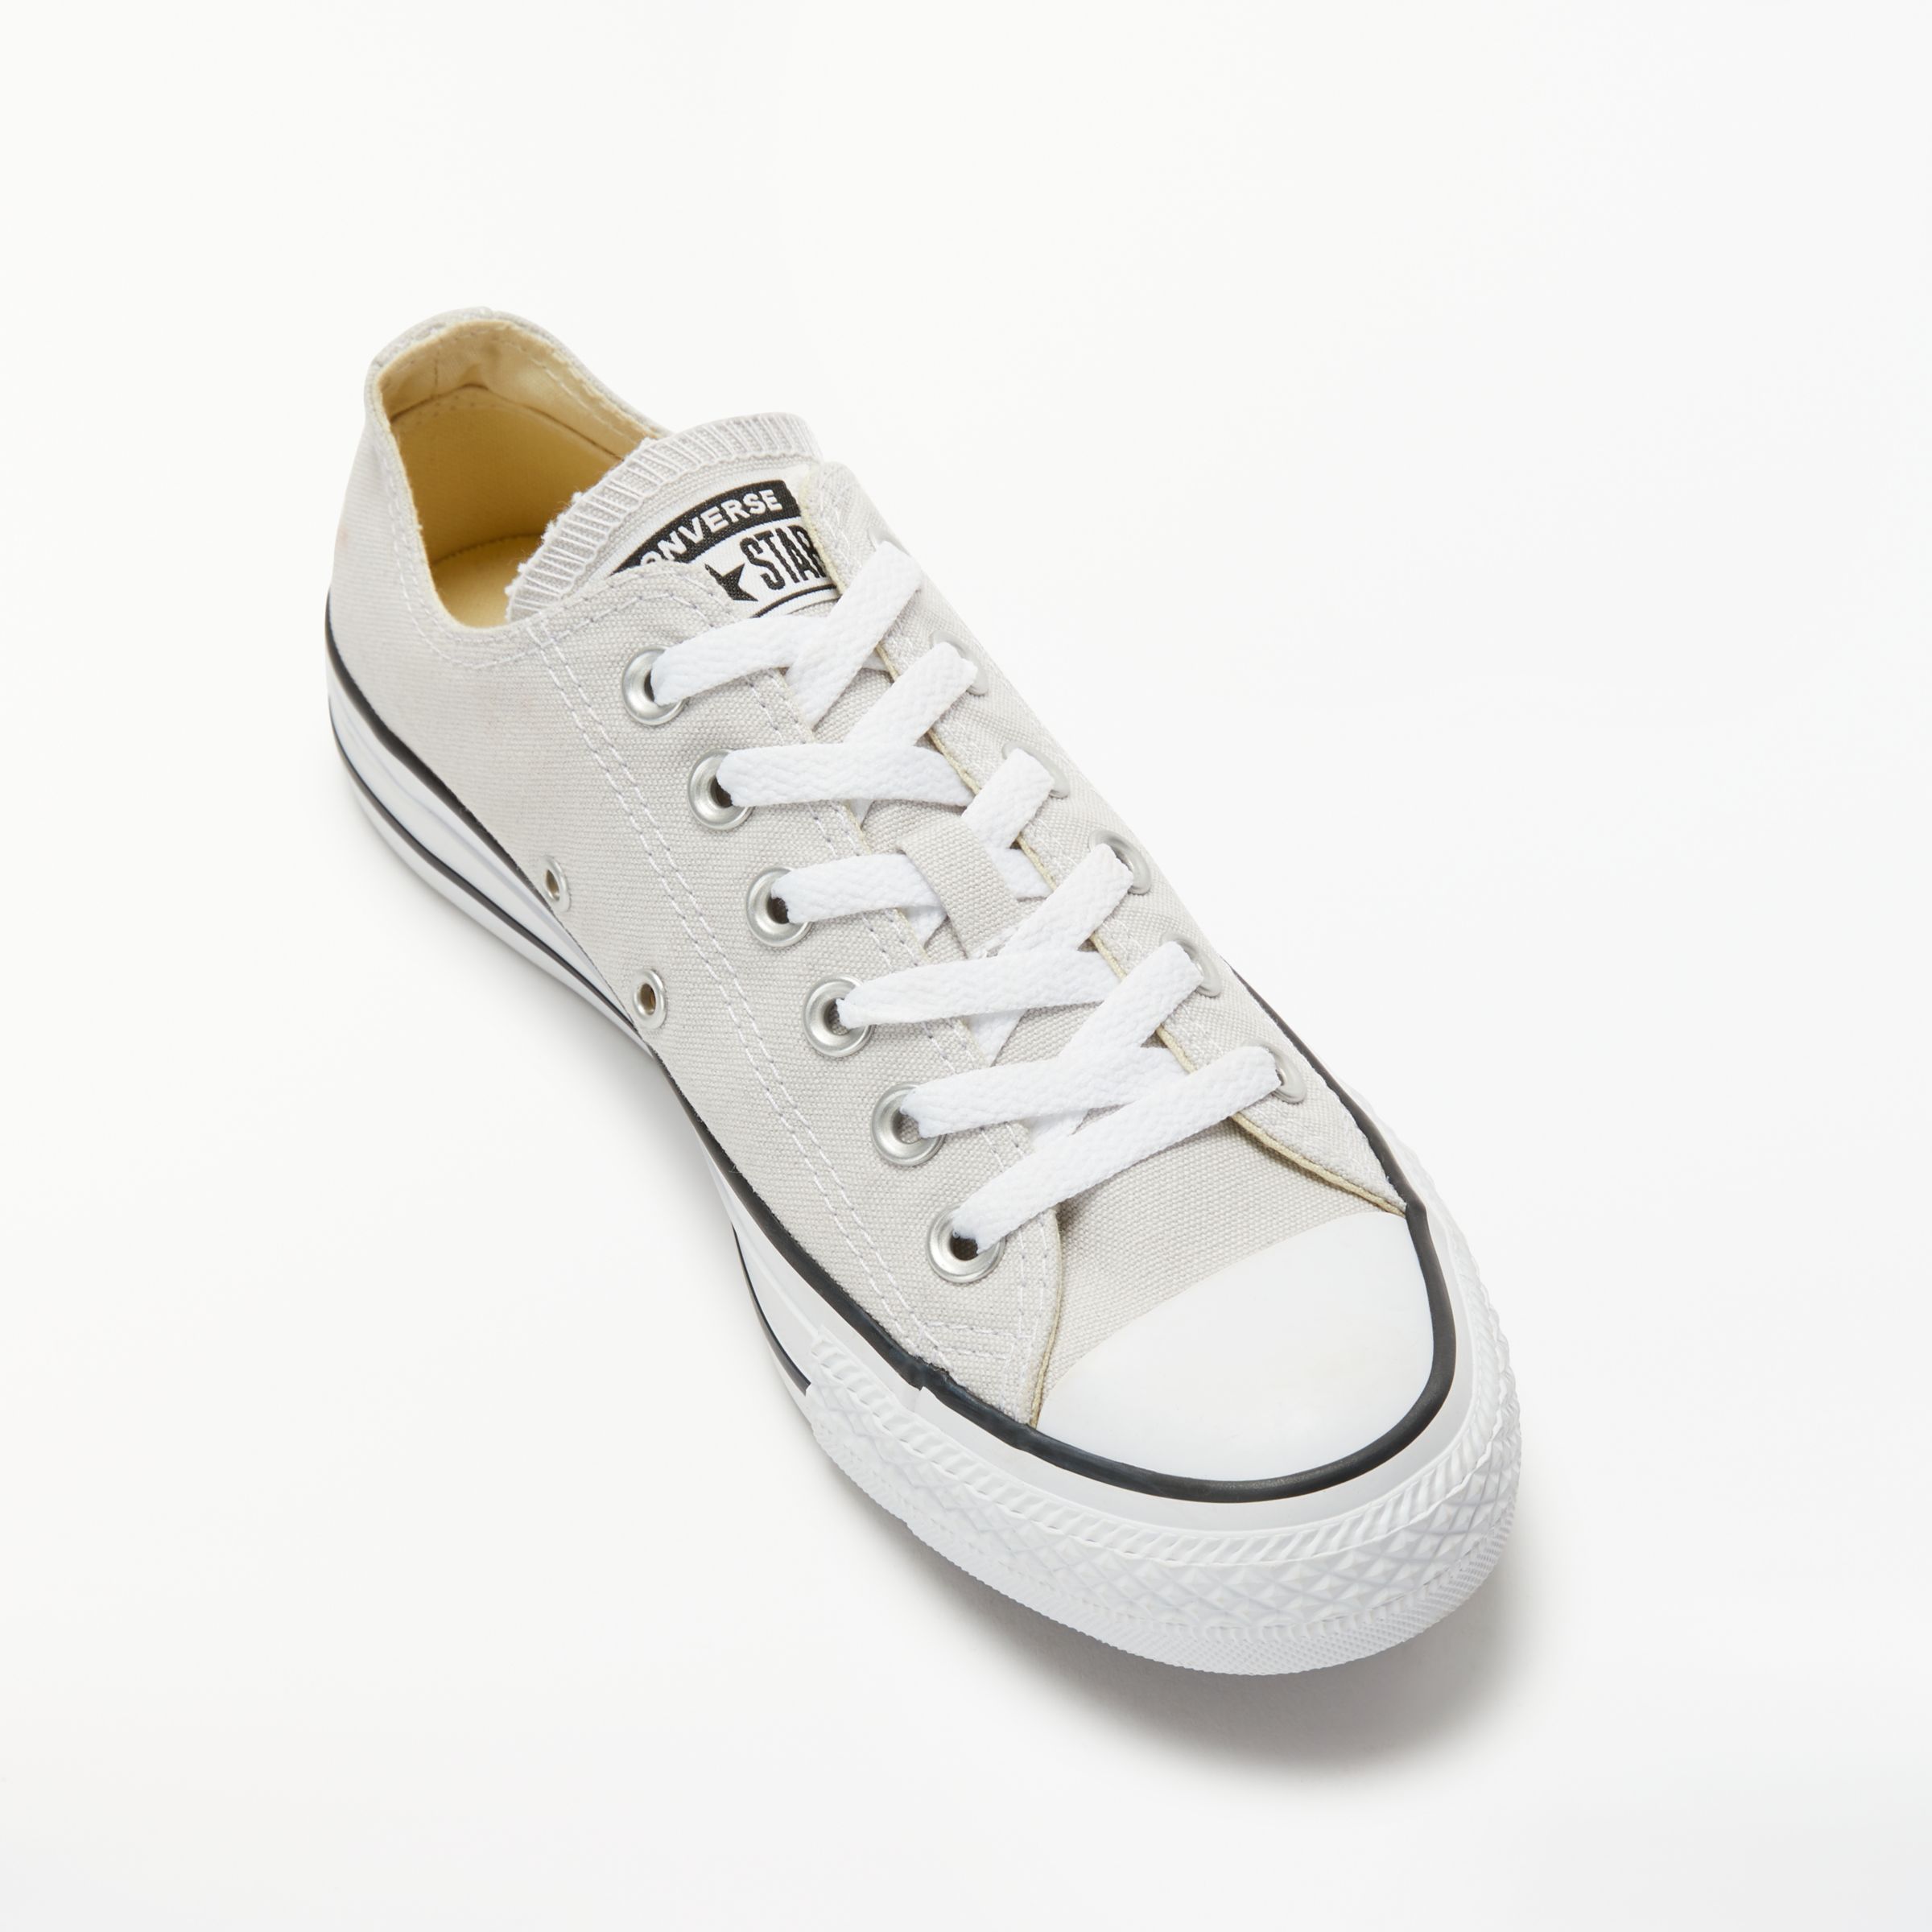 chuck taylor all star ox canvas low top trainers